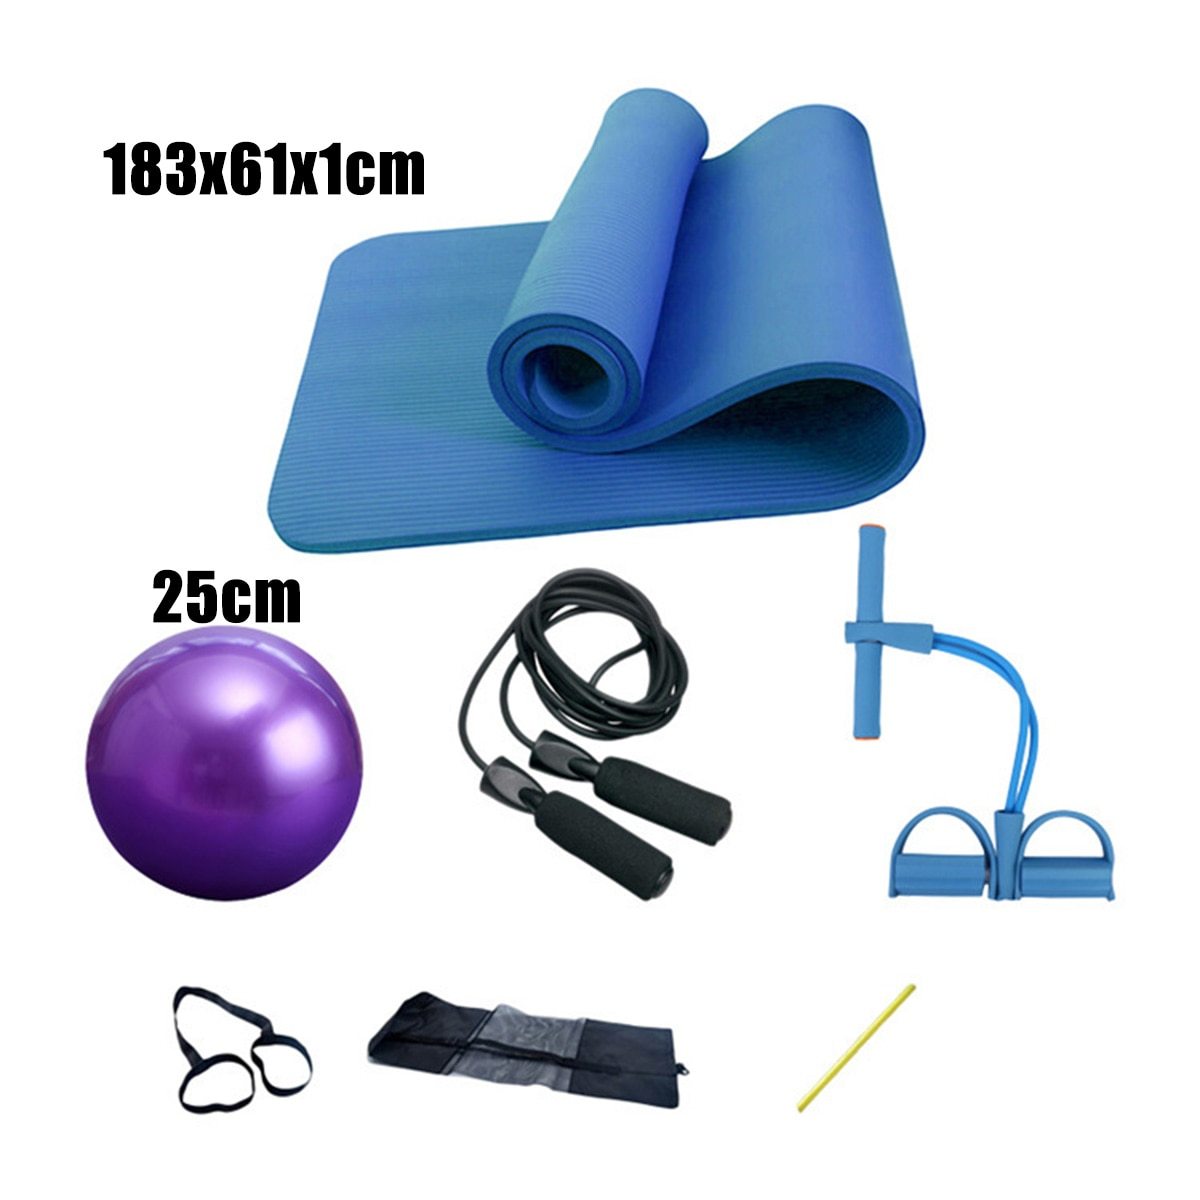 Whether you are having your home yoga session or a regular workout session at home, this deluxe 5-pcs set will have the gear you need